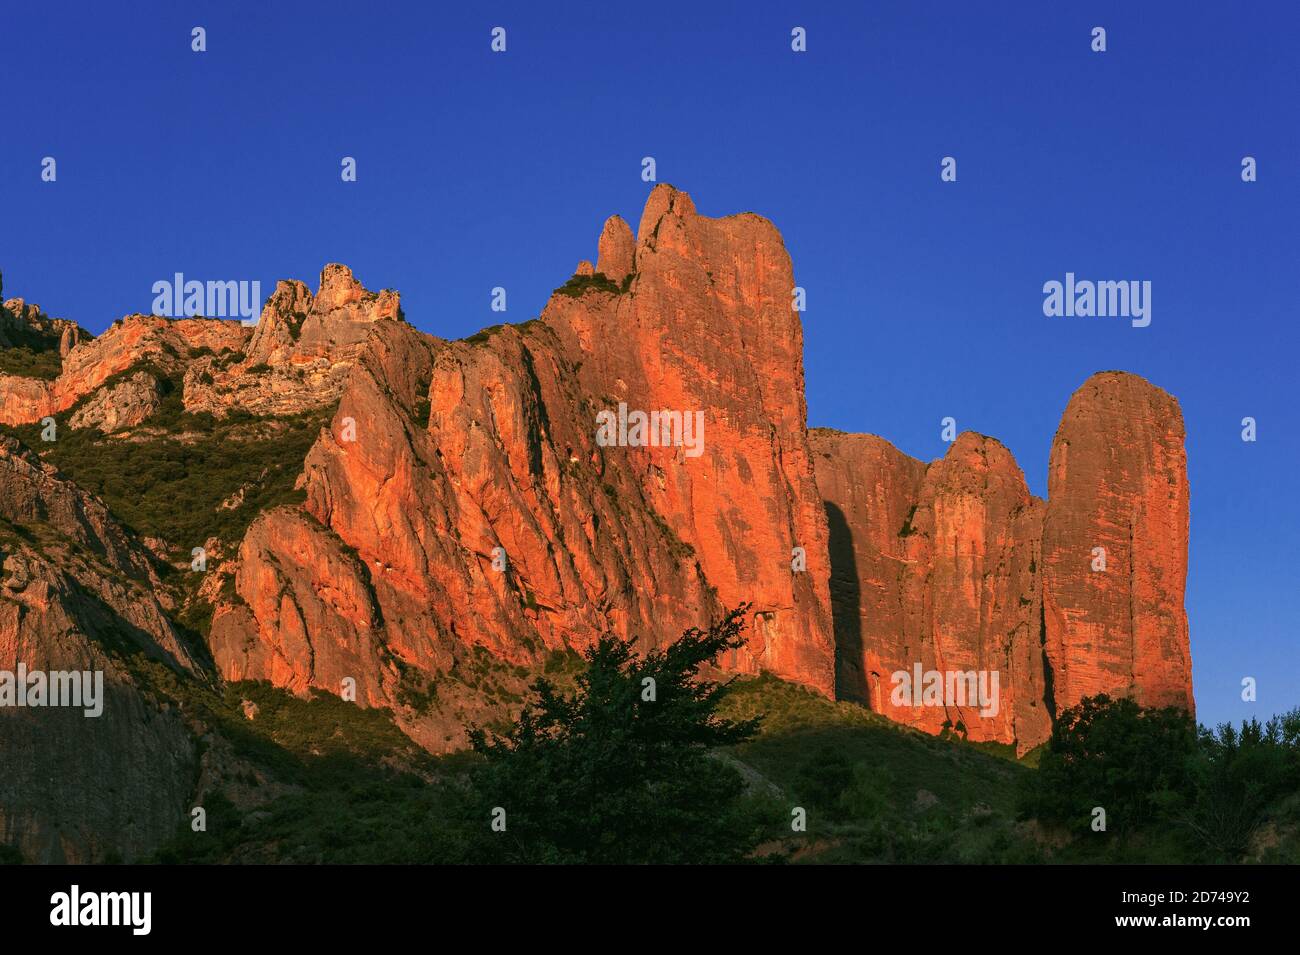 The majestic Mallos de Riglos, a spectacular natural gateway to the Pyrenees, glow bright orange-red in evening sunlight in Huesca Province, Aragon, Spain.  Los Mallos (The Mallets) formed at least 20 million years ago, when material washed down from Pyrenean slopes compacted with limestone to form conglomerate rock.  The distinctive ‘mallets’, sculpted by erosion, are a physical border between the Pyrenean foothills and the Ebro Basin, rising to around 300 m (980 ft).  In the 11th century, the Mallos area was briefly an independent kingdom after Pedro, King of Aragon, gave it as a dowry. Stock Photo